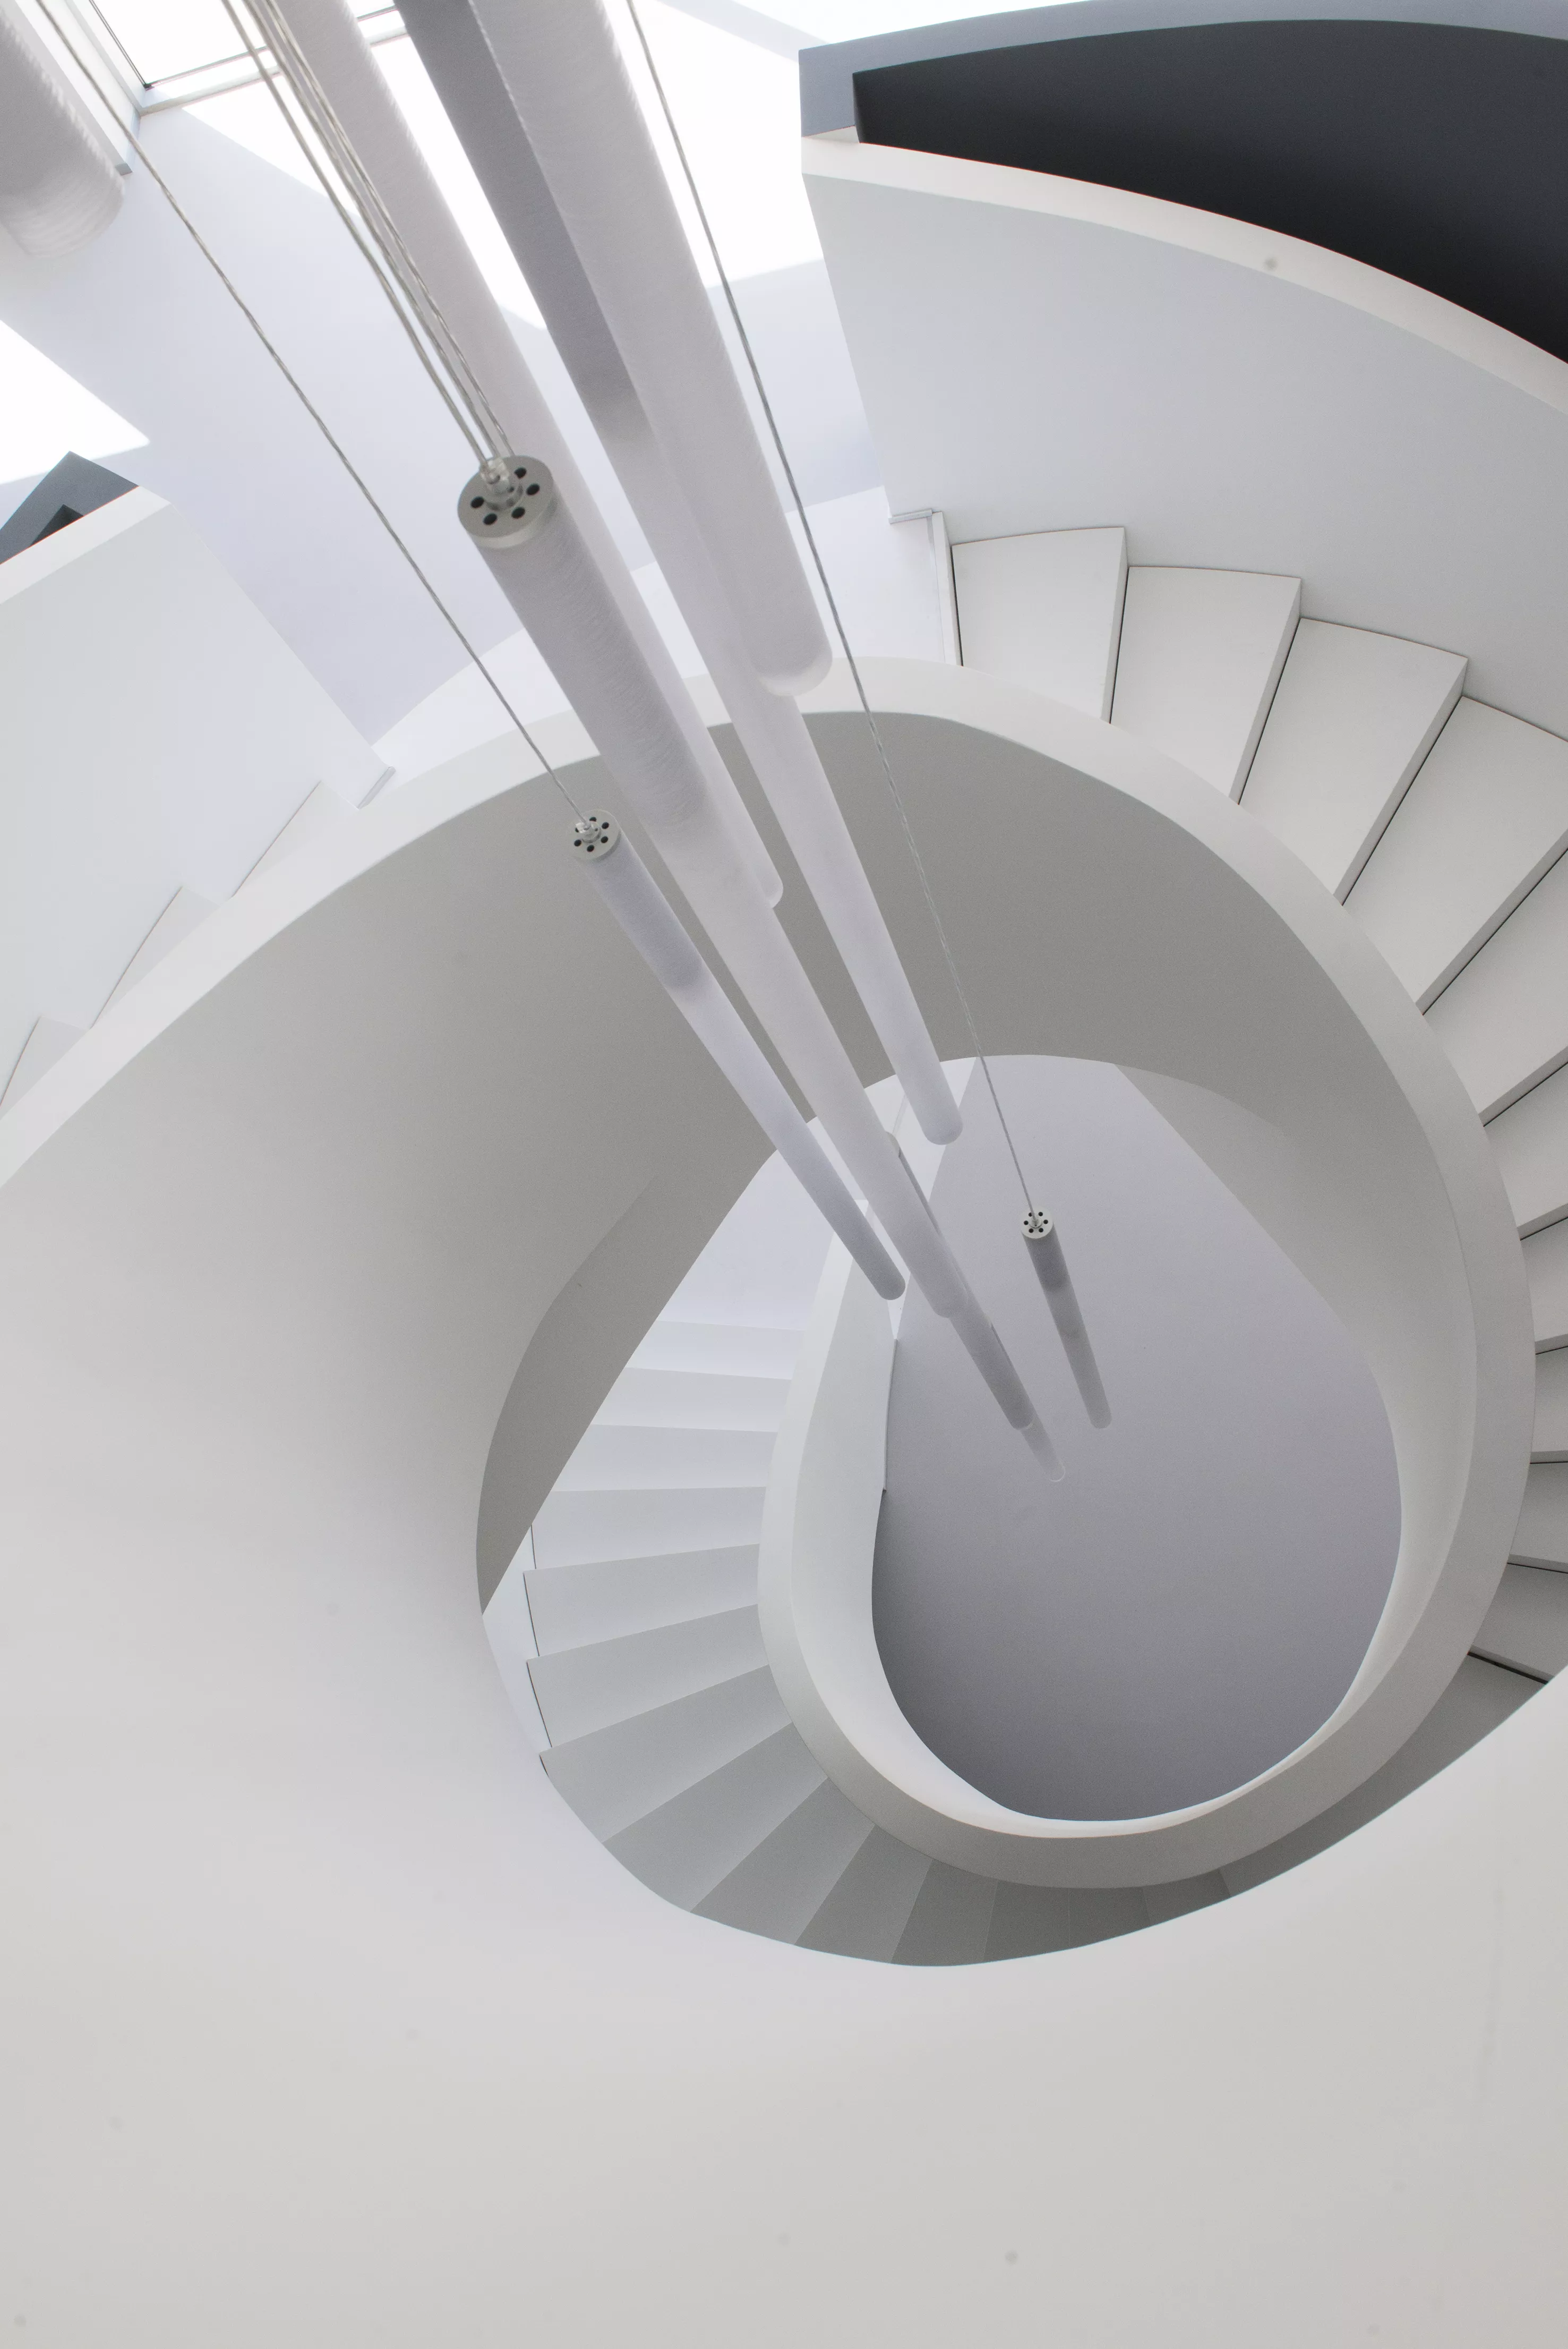 A sculptural staircase in HIMACS